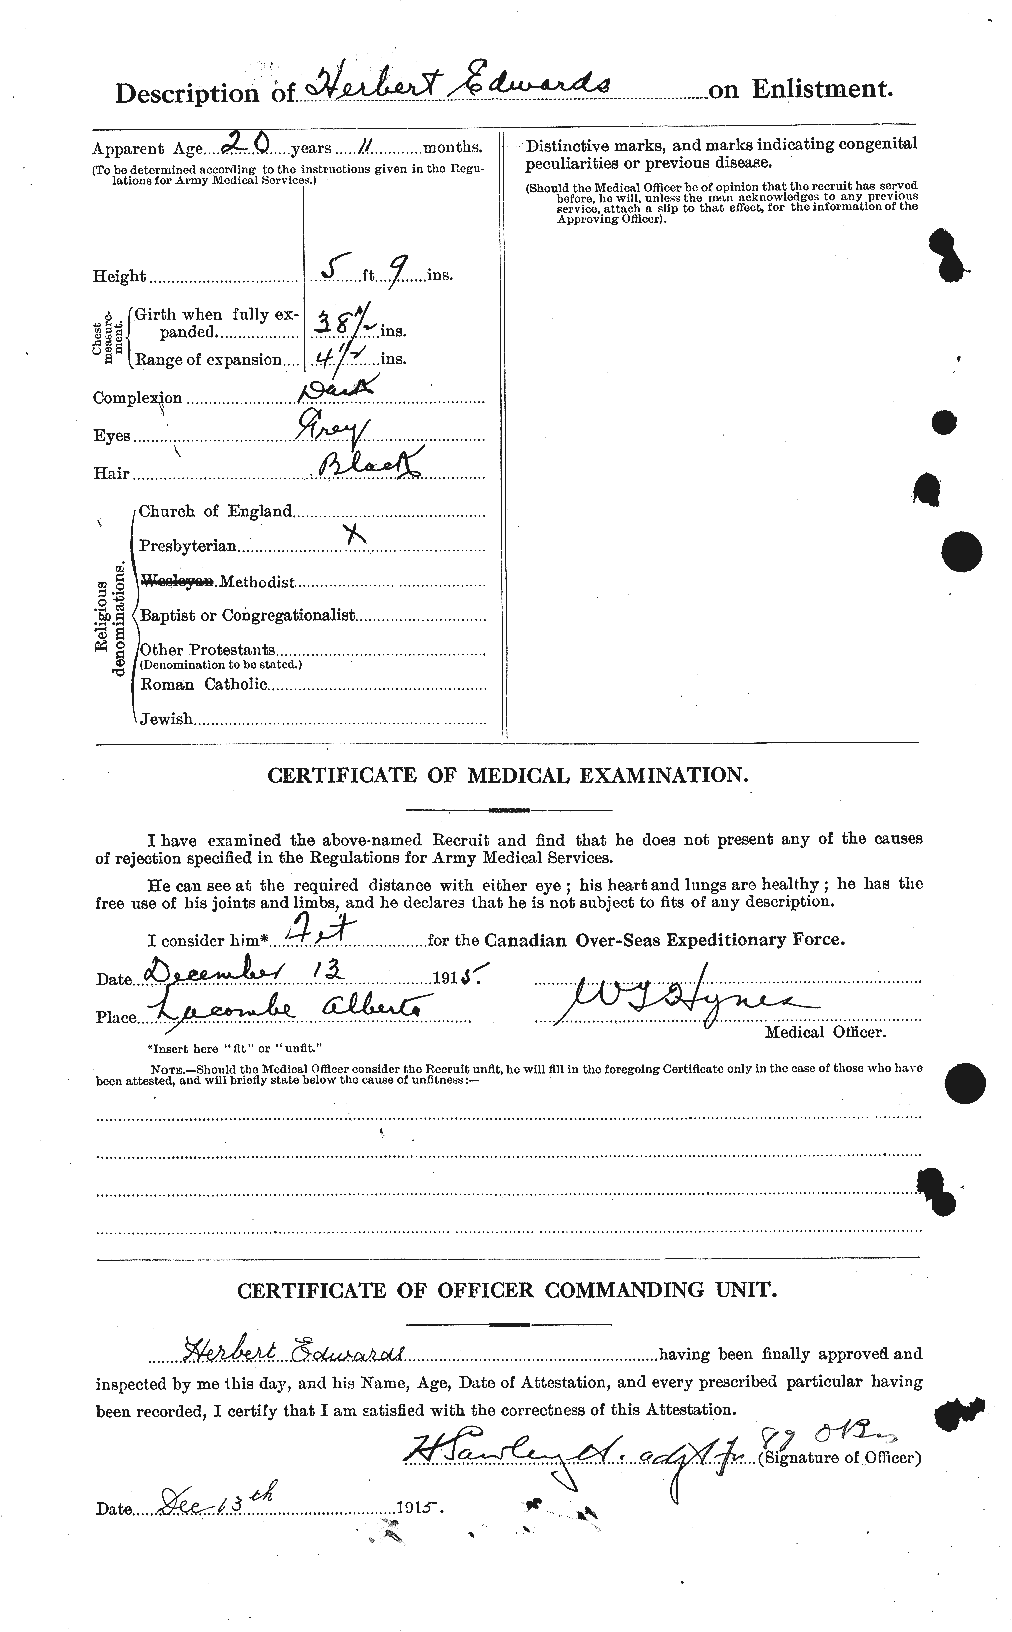 Personnel Records of the First World War - CEF 309768b